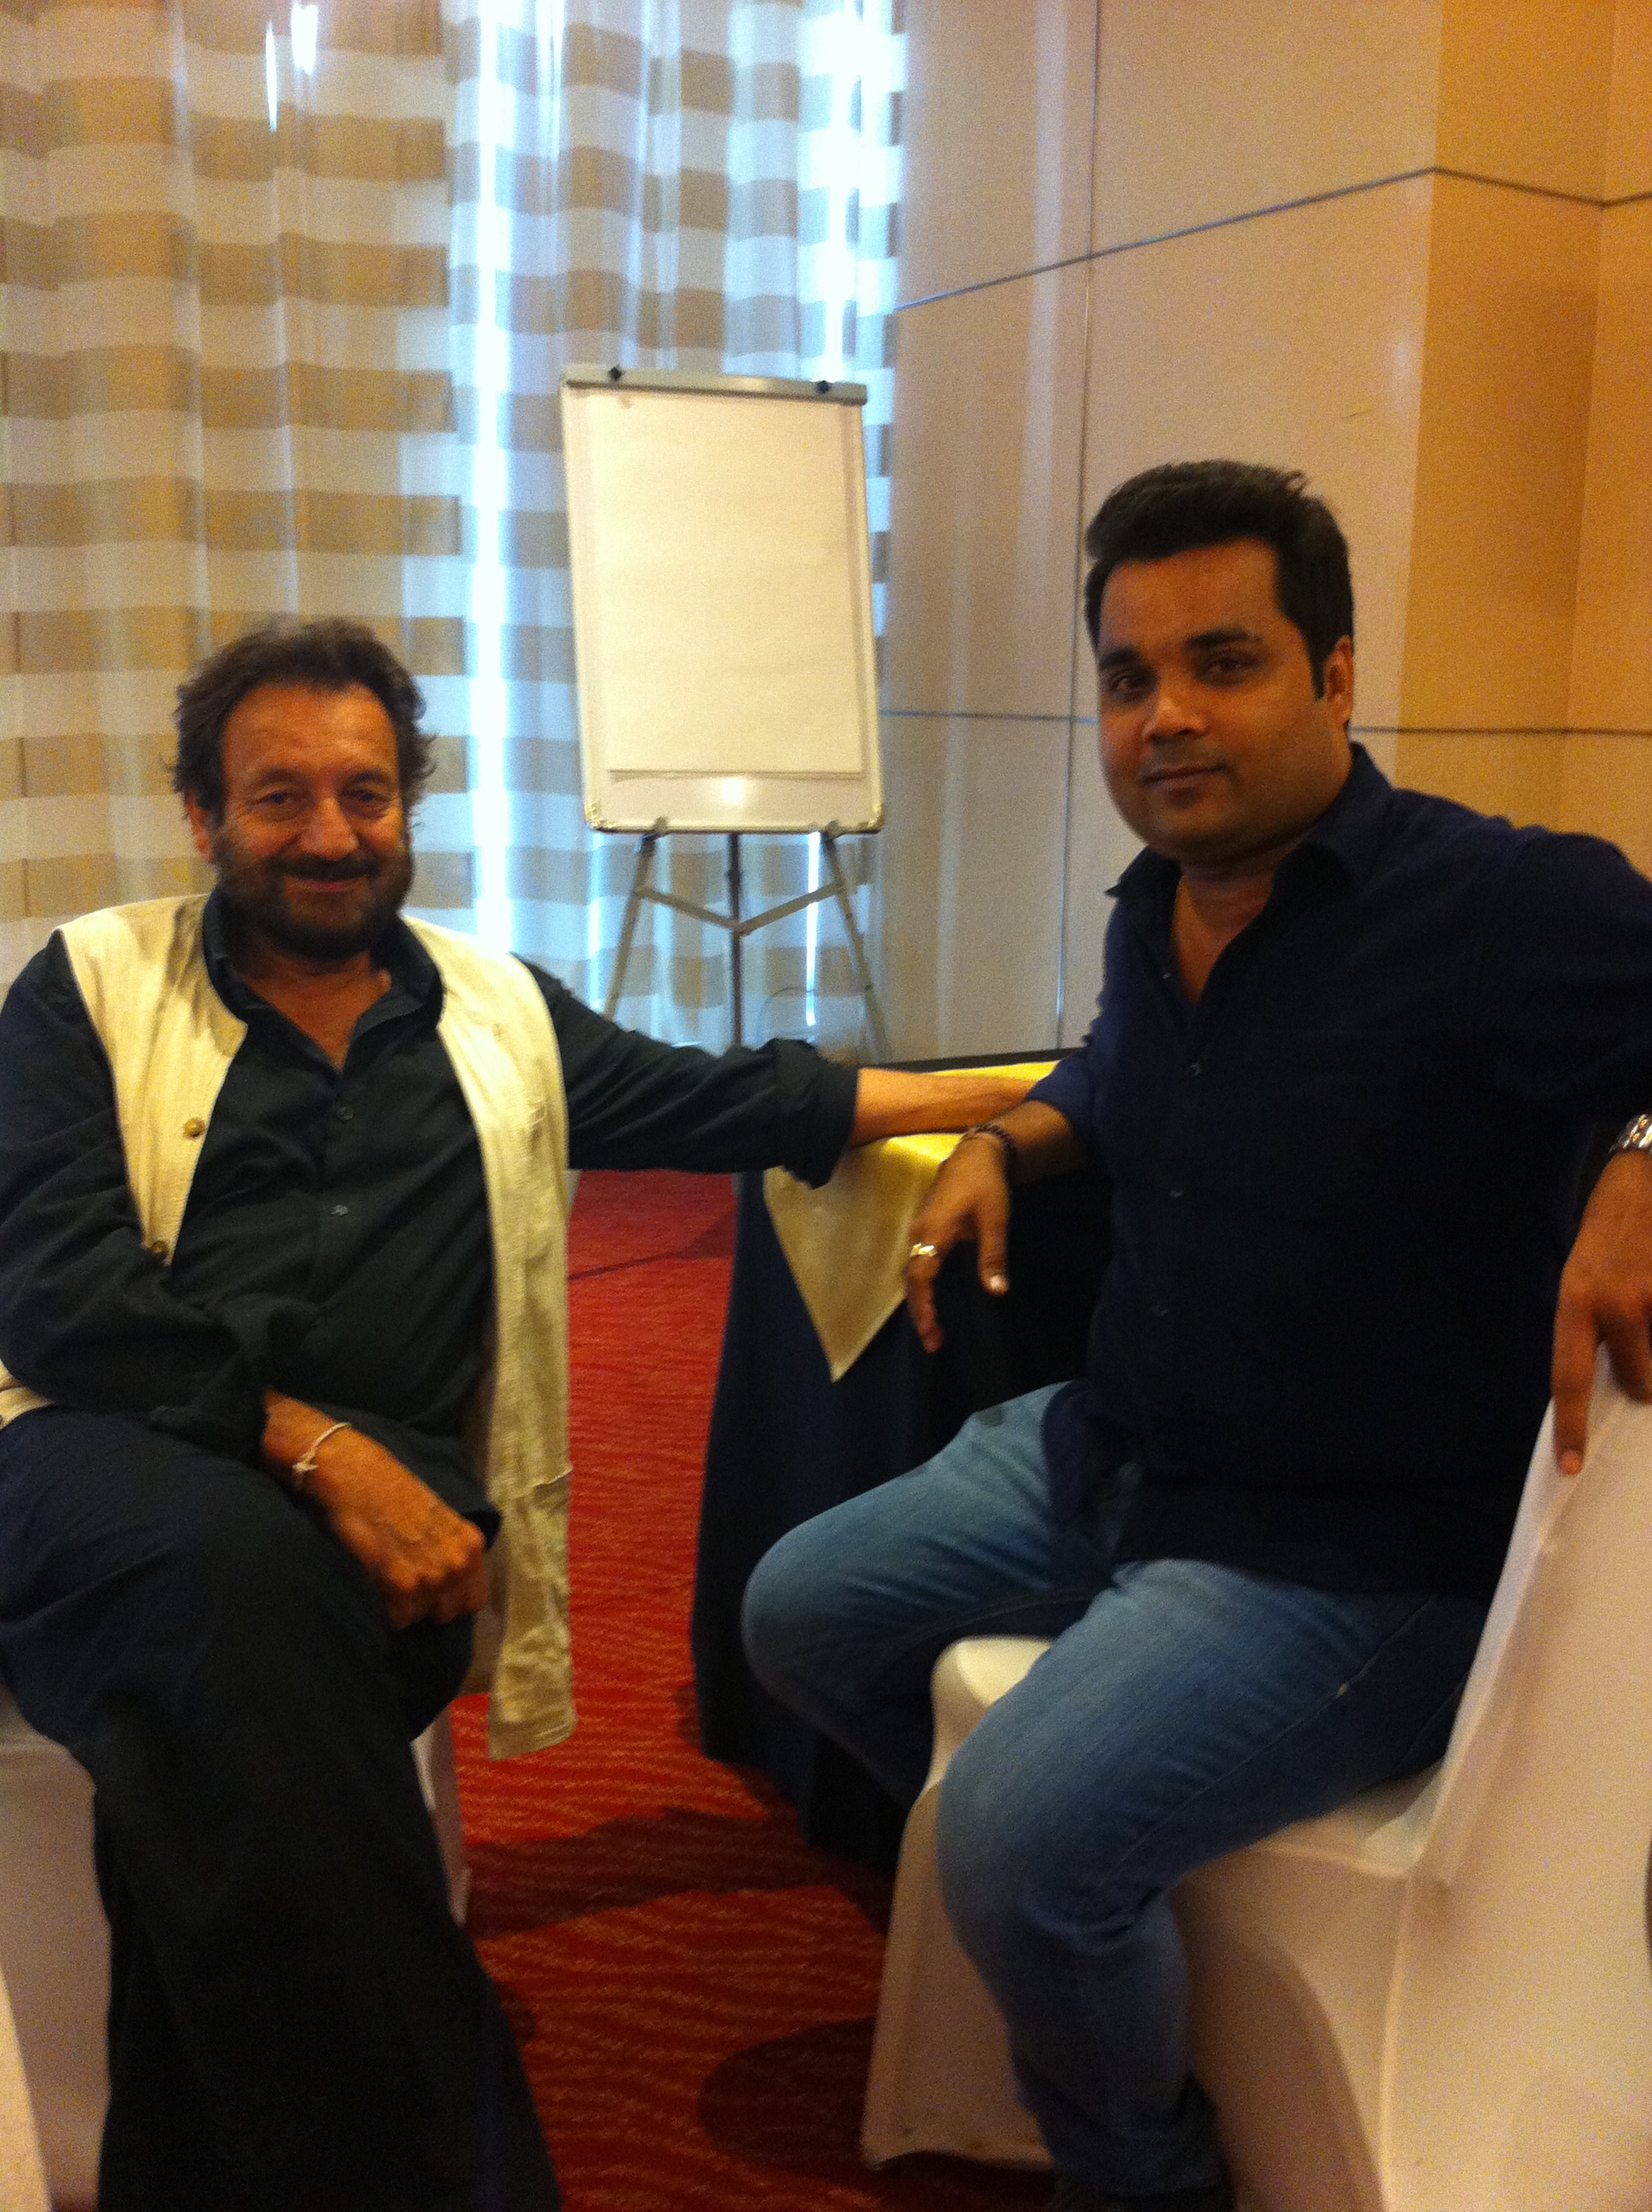 with Shekhar Kapoor. Still remember Mr. India. It was nice talking to him about film making.